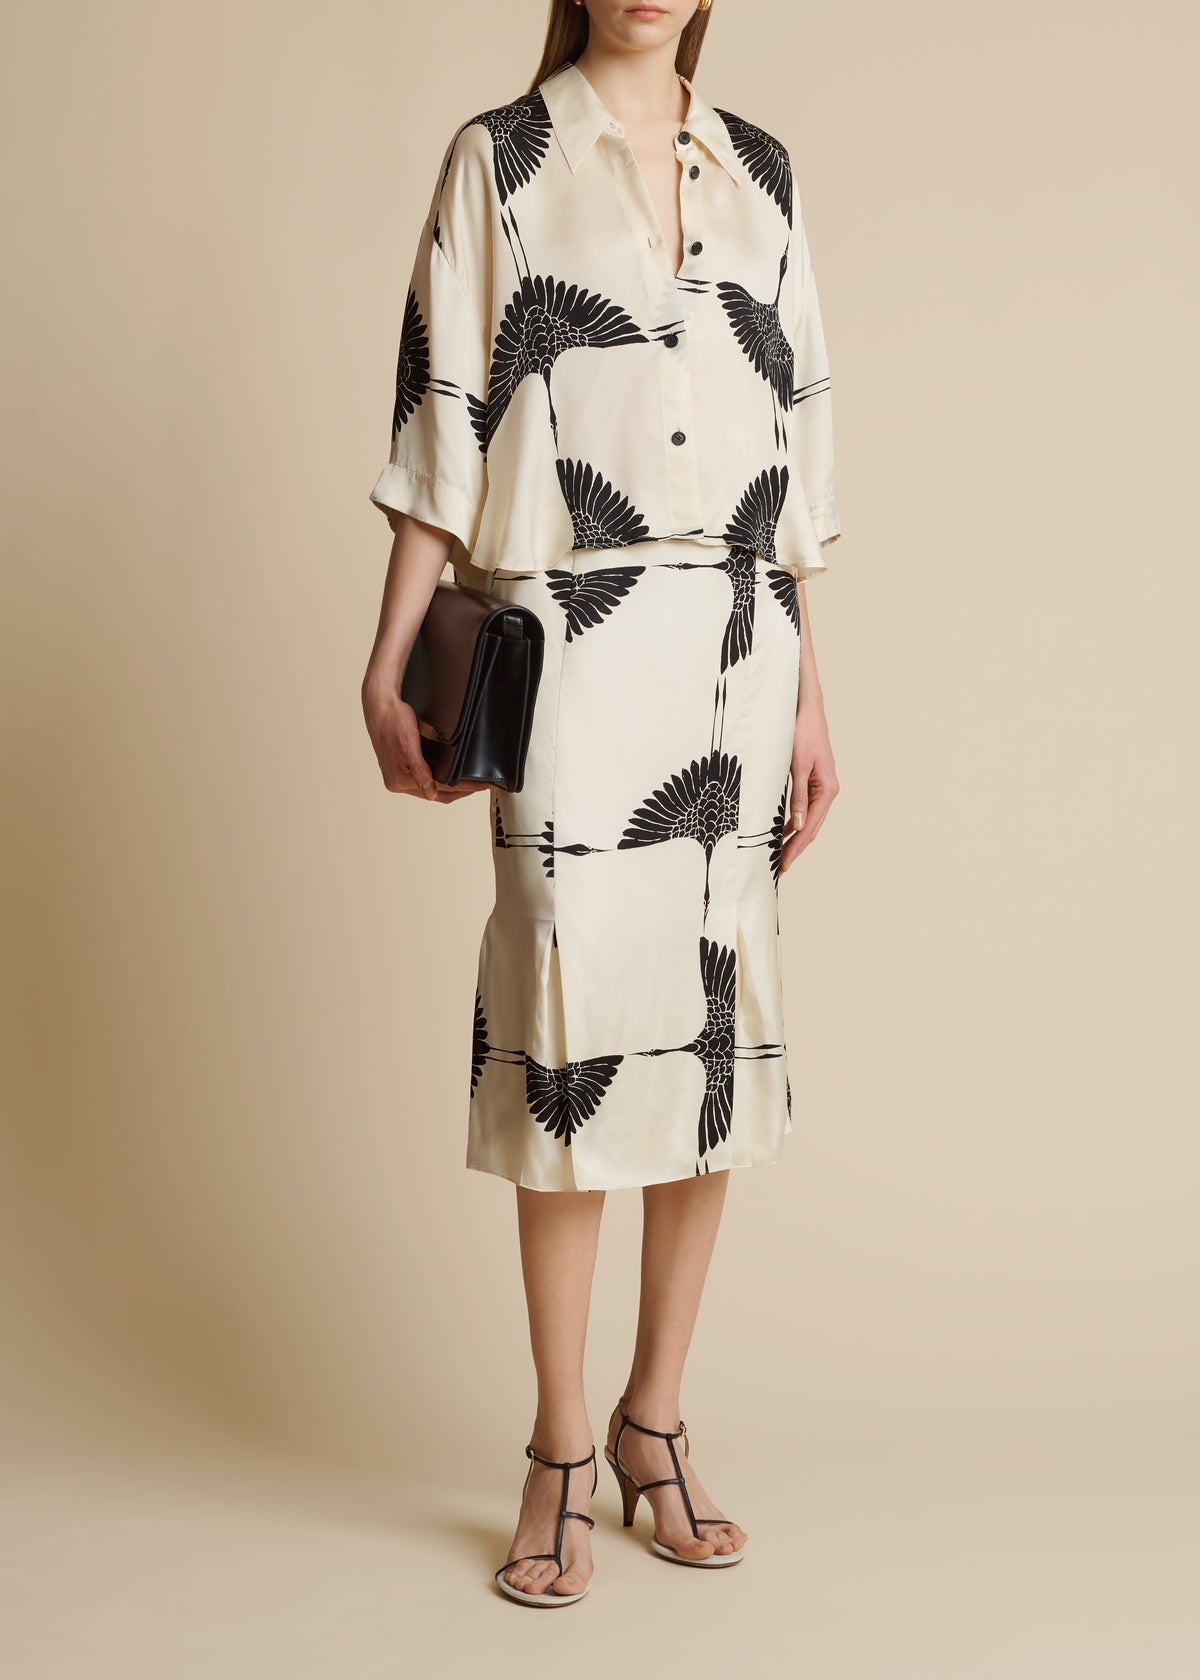 The Levy Skirt in Cream and Black Crane Print - 2